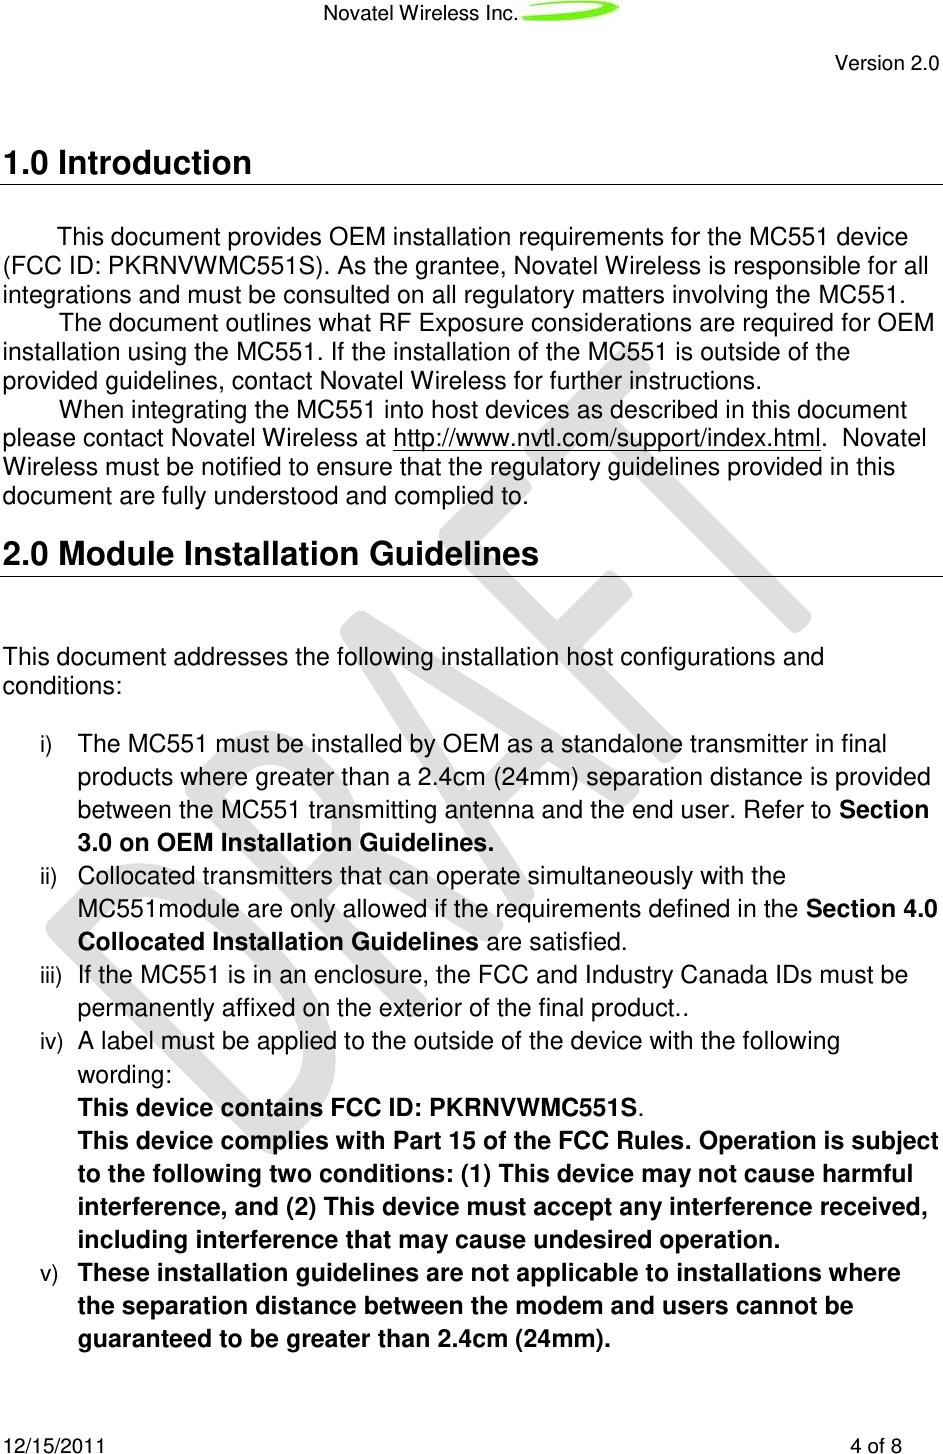 Novatel Wireless Inc.   Version 2.0 12/15/2011    4 of 8  1.0 Introduction This document provides OEM installation requirements for the MC551 device (FCC ID: PKRNVWMC551S). As the grantee, Novatel Wireless is responsible for all integrations and must be consulted on all regulatory matters involving the MC551.  The document outlines what RF Exposure considerations are required for OEM installation using the MC551. If the installation of the MC551 is outside of the provided guidelines, contact Novatel Wireless for further instructions. When integrating the MC551 into host devices as described in this document please contact Novatel Wireless at http://www.nvtl.com/support/index.html.  Novatel Wireless must be notified to ensure that the regulatory guidelines provided in this document are fully understood and complied to. 2.0 Module Installation Guidelines  This document addresses the following installation host configurations and conditions:    i) The MC551 must be installed by OEM as a standalone transmitter in final products where greater than a 2.4cm (24mm) separation distance is provided between the MC551 transmitting antenna and the end user. Refer to Section 3.0 on OEM Installation Guidelines. ii) Collocated transmitters that can operate simultaneously with the MC551module are only allowed if the requirements defined in the Section 4.0 Collocated Installation Guidelines are satisfied. iii) If the MC551 is in an enclosure, the FCC and Industry Canada IDs must be permanently affixed on the exterior of the final product.. iv)  A label must be applied to the outside of the device with the following wording:  This device contains FCC ID: PKRNVWMC551S. This device complies with Part 15 of the FCC Rules. Operation is subject to the following two conditions: (1) This device may not cause harmful interference, and (2) This device must accept any interference received, including interference that may cause undesired operation. v) These installation guidelines are not applicable to installations where the separation distance between the modem and users cannot be guaranteed to be greater than 2.4cm (24mm).  